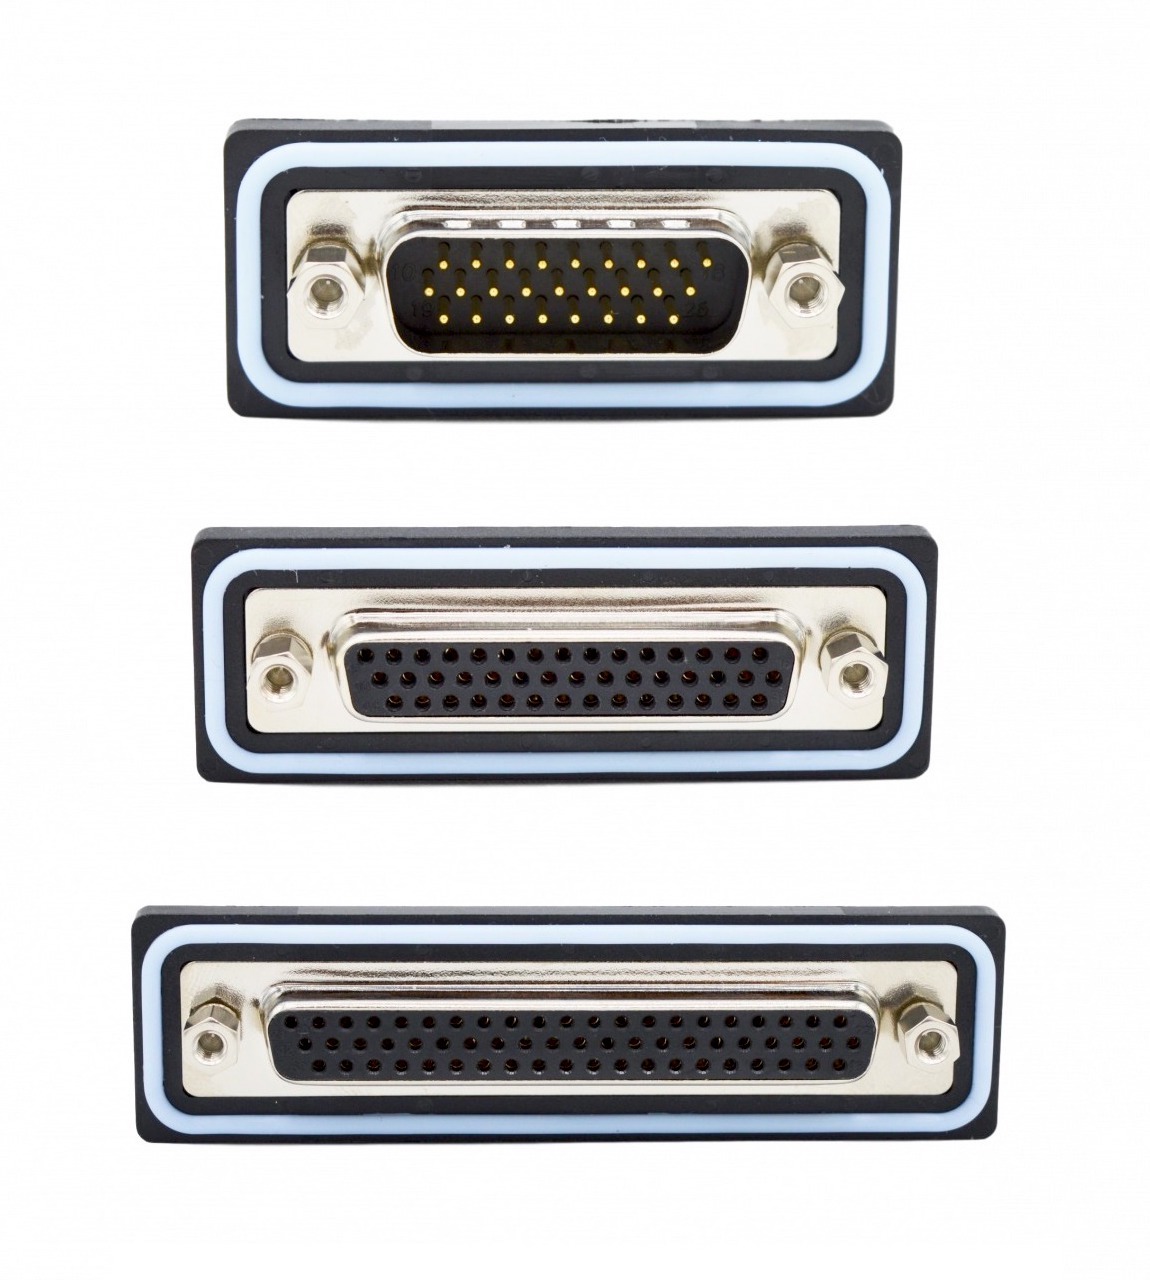 NorComp's NANOOK product line currently features three series of ruggedized, waterproof D-Sub connectors